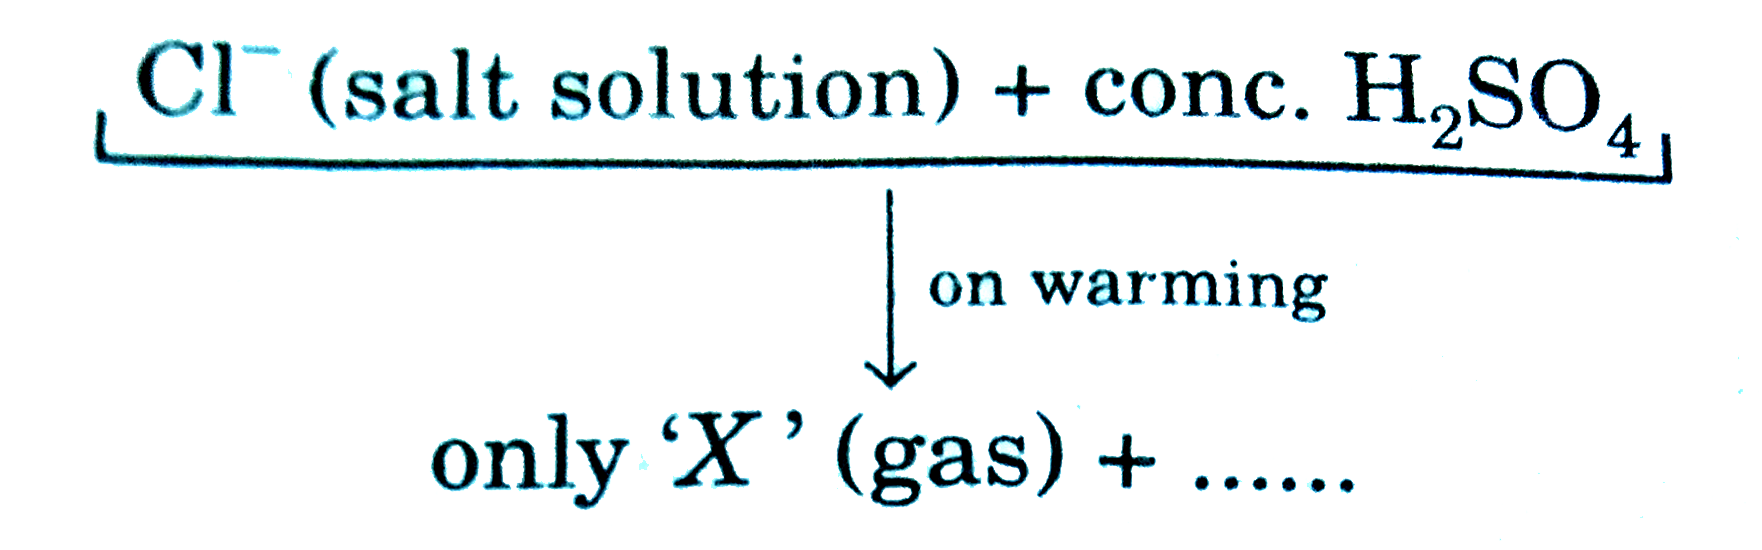 The correct statements about 'X' gas is: